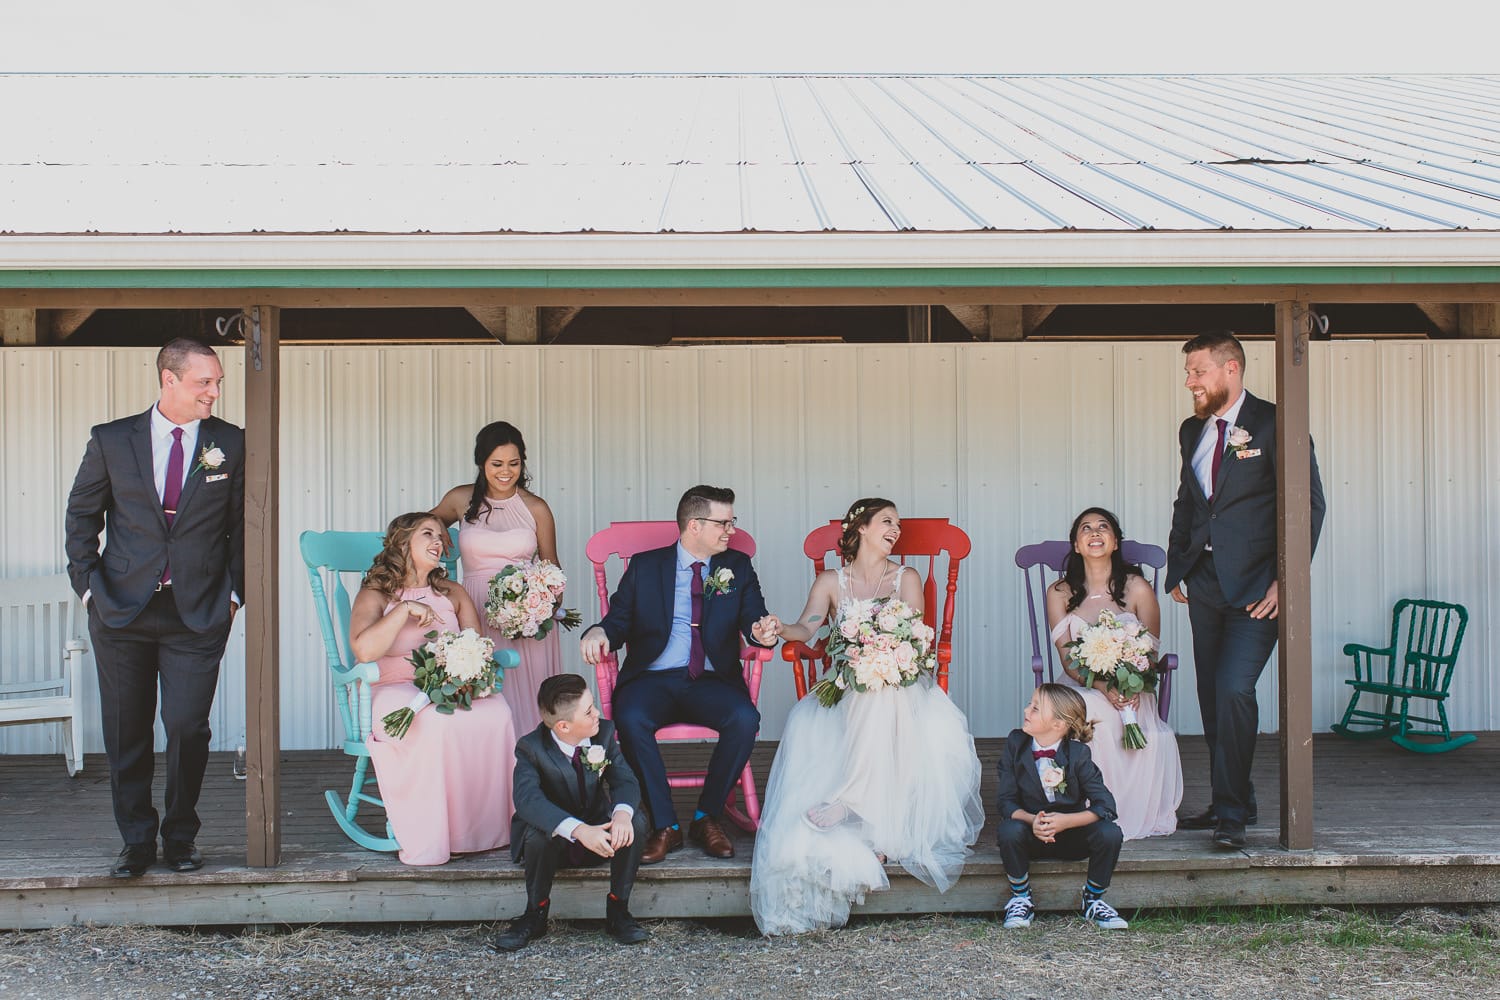 fun and informal wedding party portrait in colourful rocking chairs at hopcott farms barn wedding